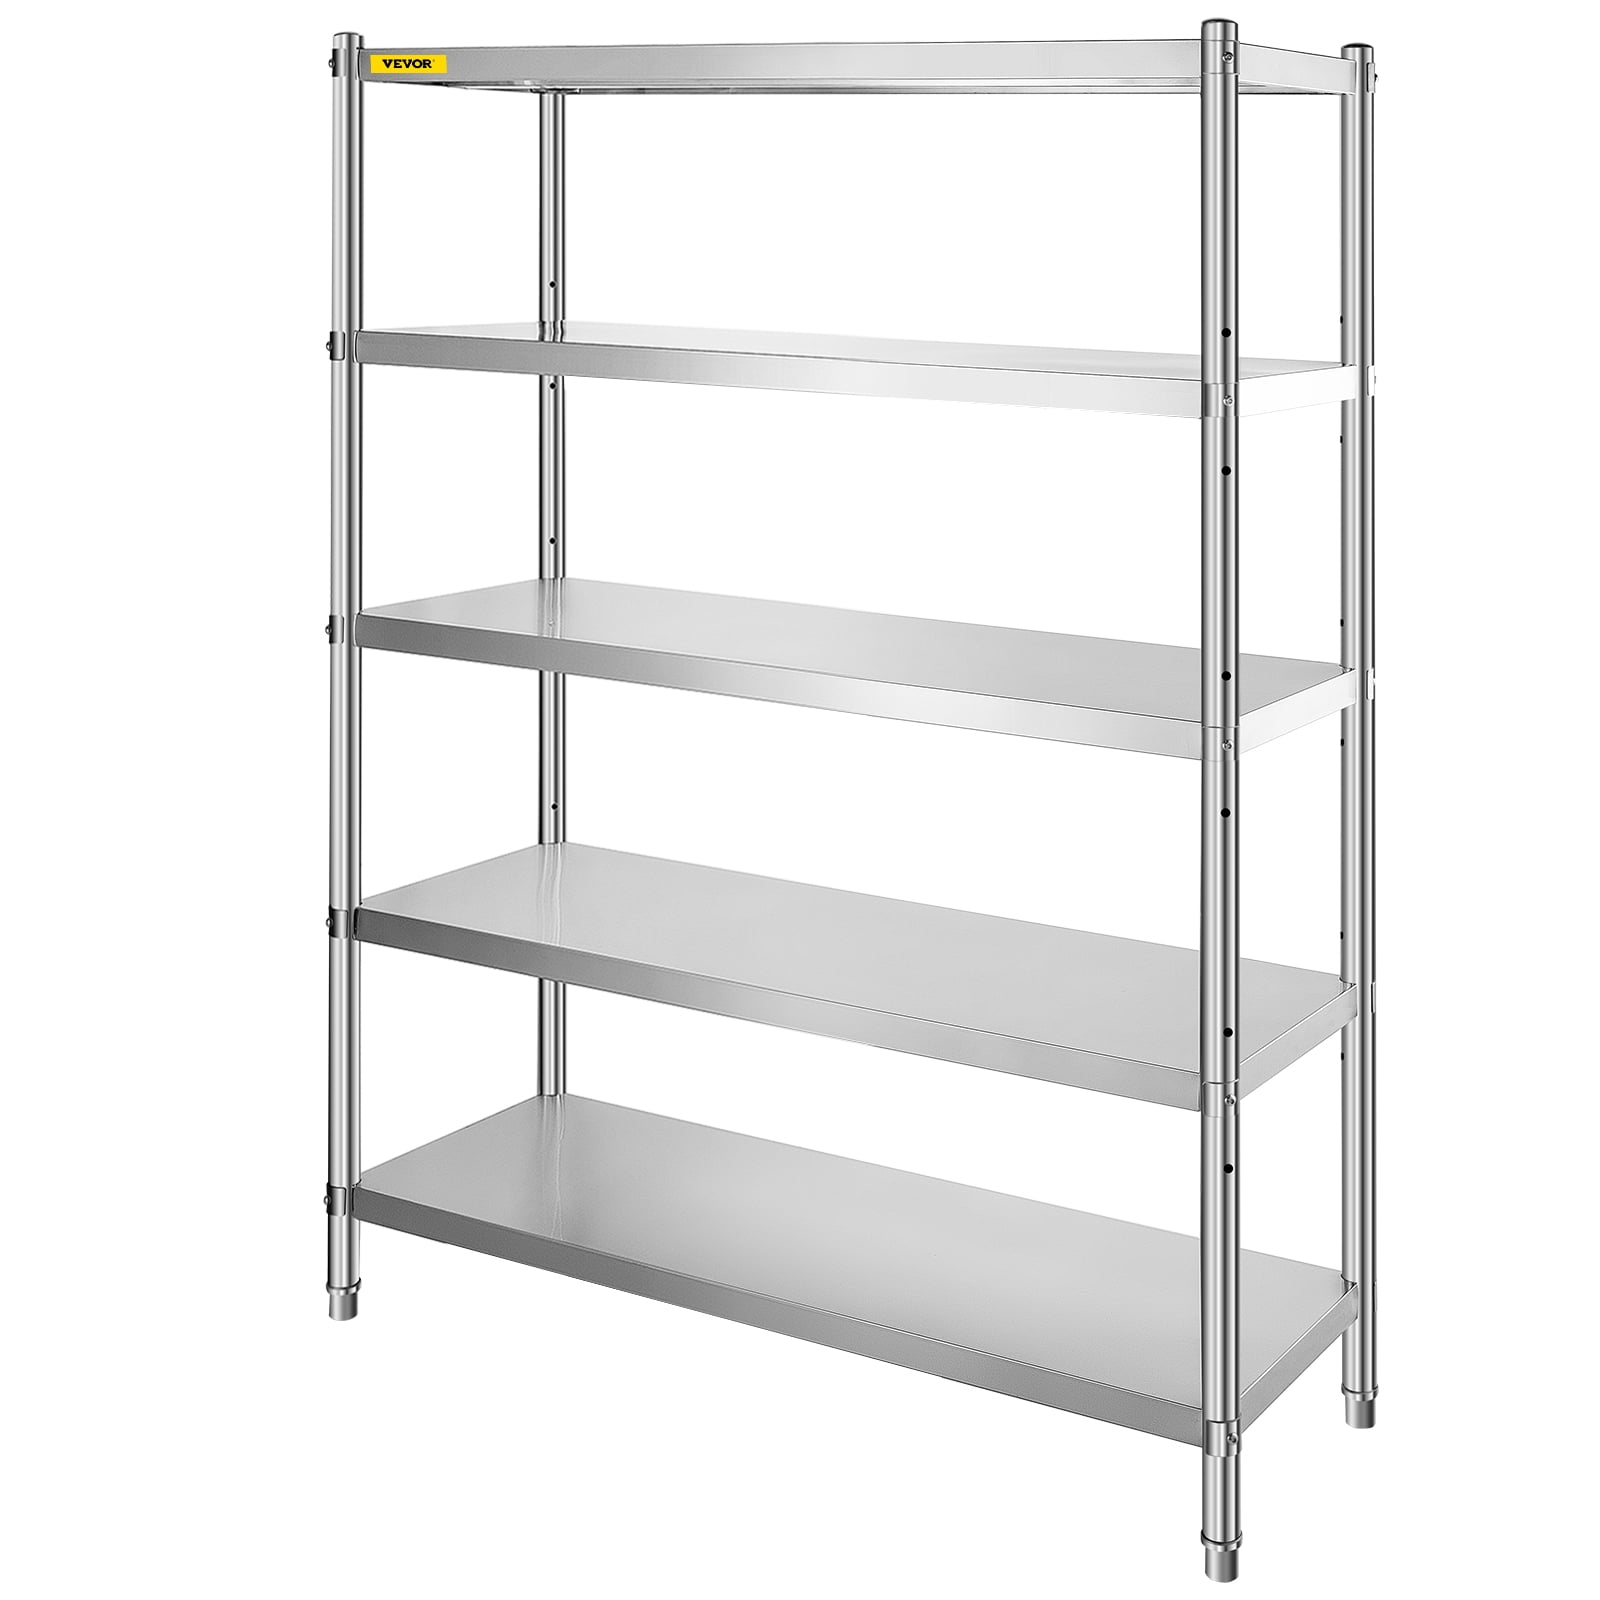 4 5 Tier 5FT Commercial Storage Rack Shelf Stainless Steel Kitchen Laboratory 